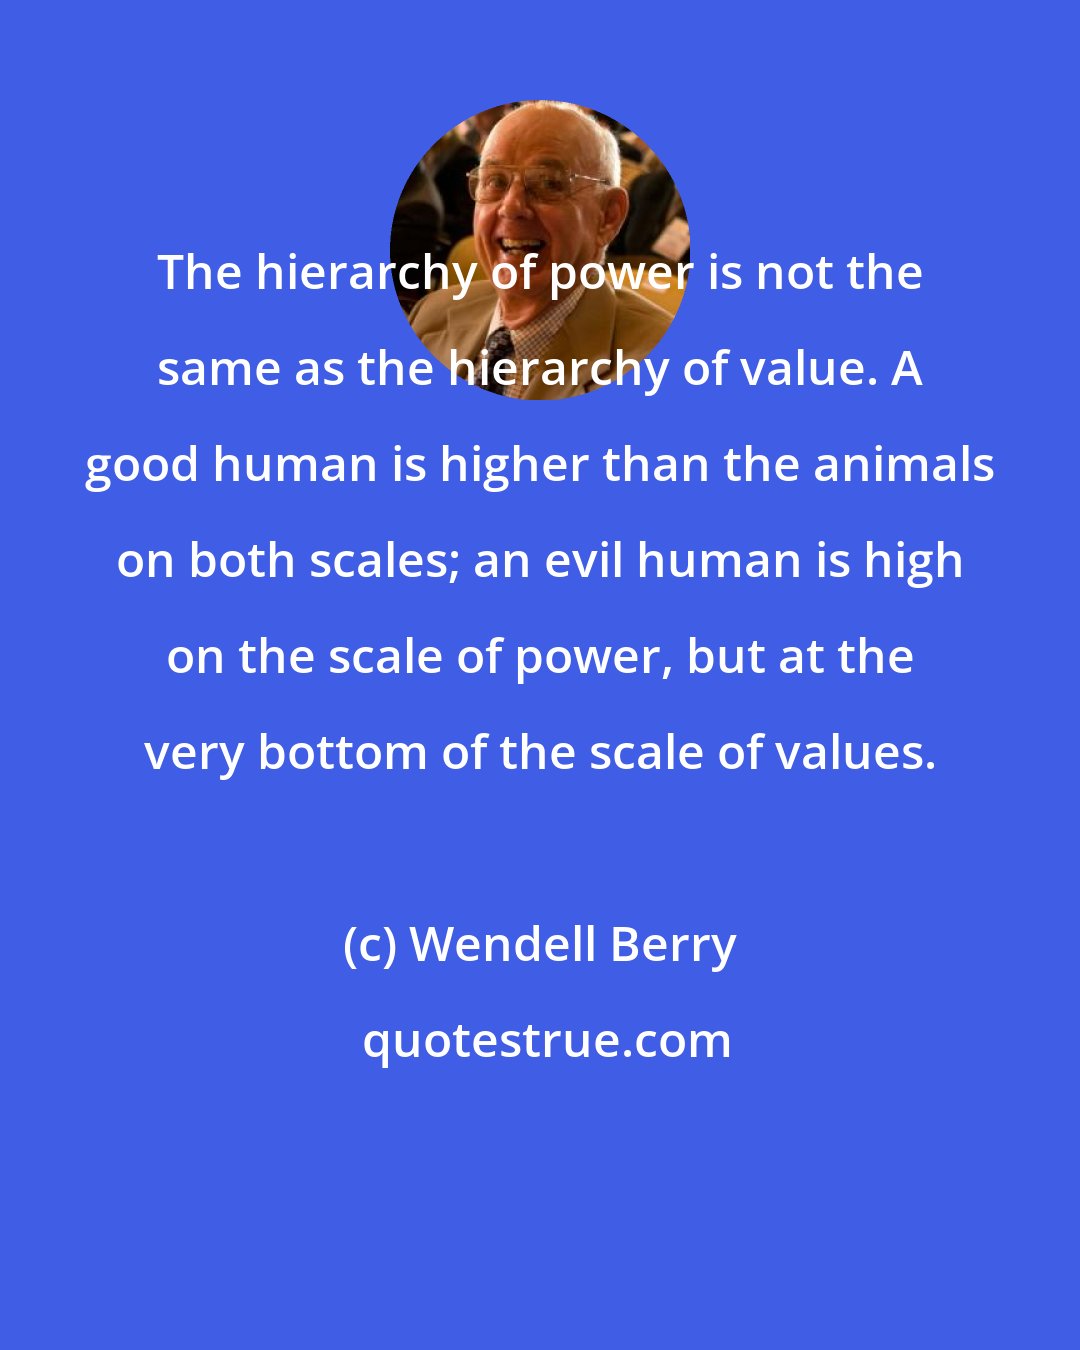 Wendell Berry: The hierarchy of power is not the same as the hierarchy of value. A good human is higher than the animals on both scales; an evil human is high on the scale of power, but at the very bottom of the scale of values.